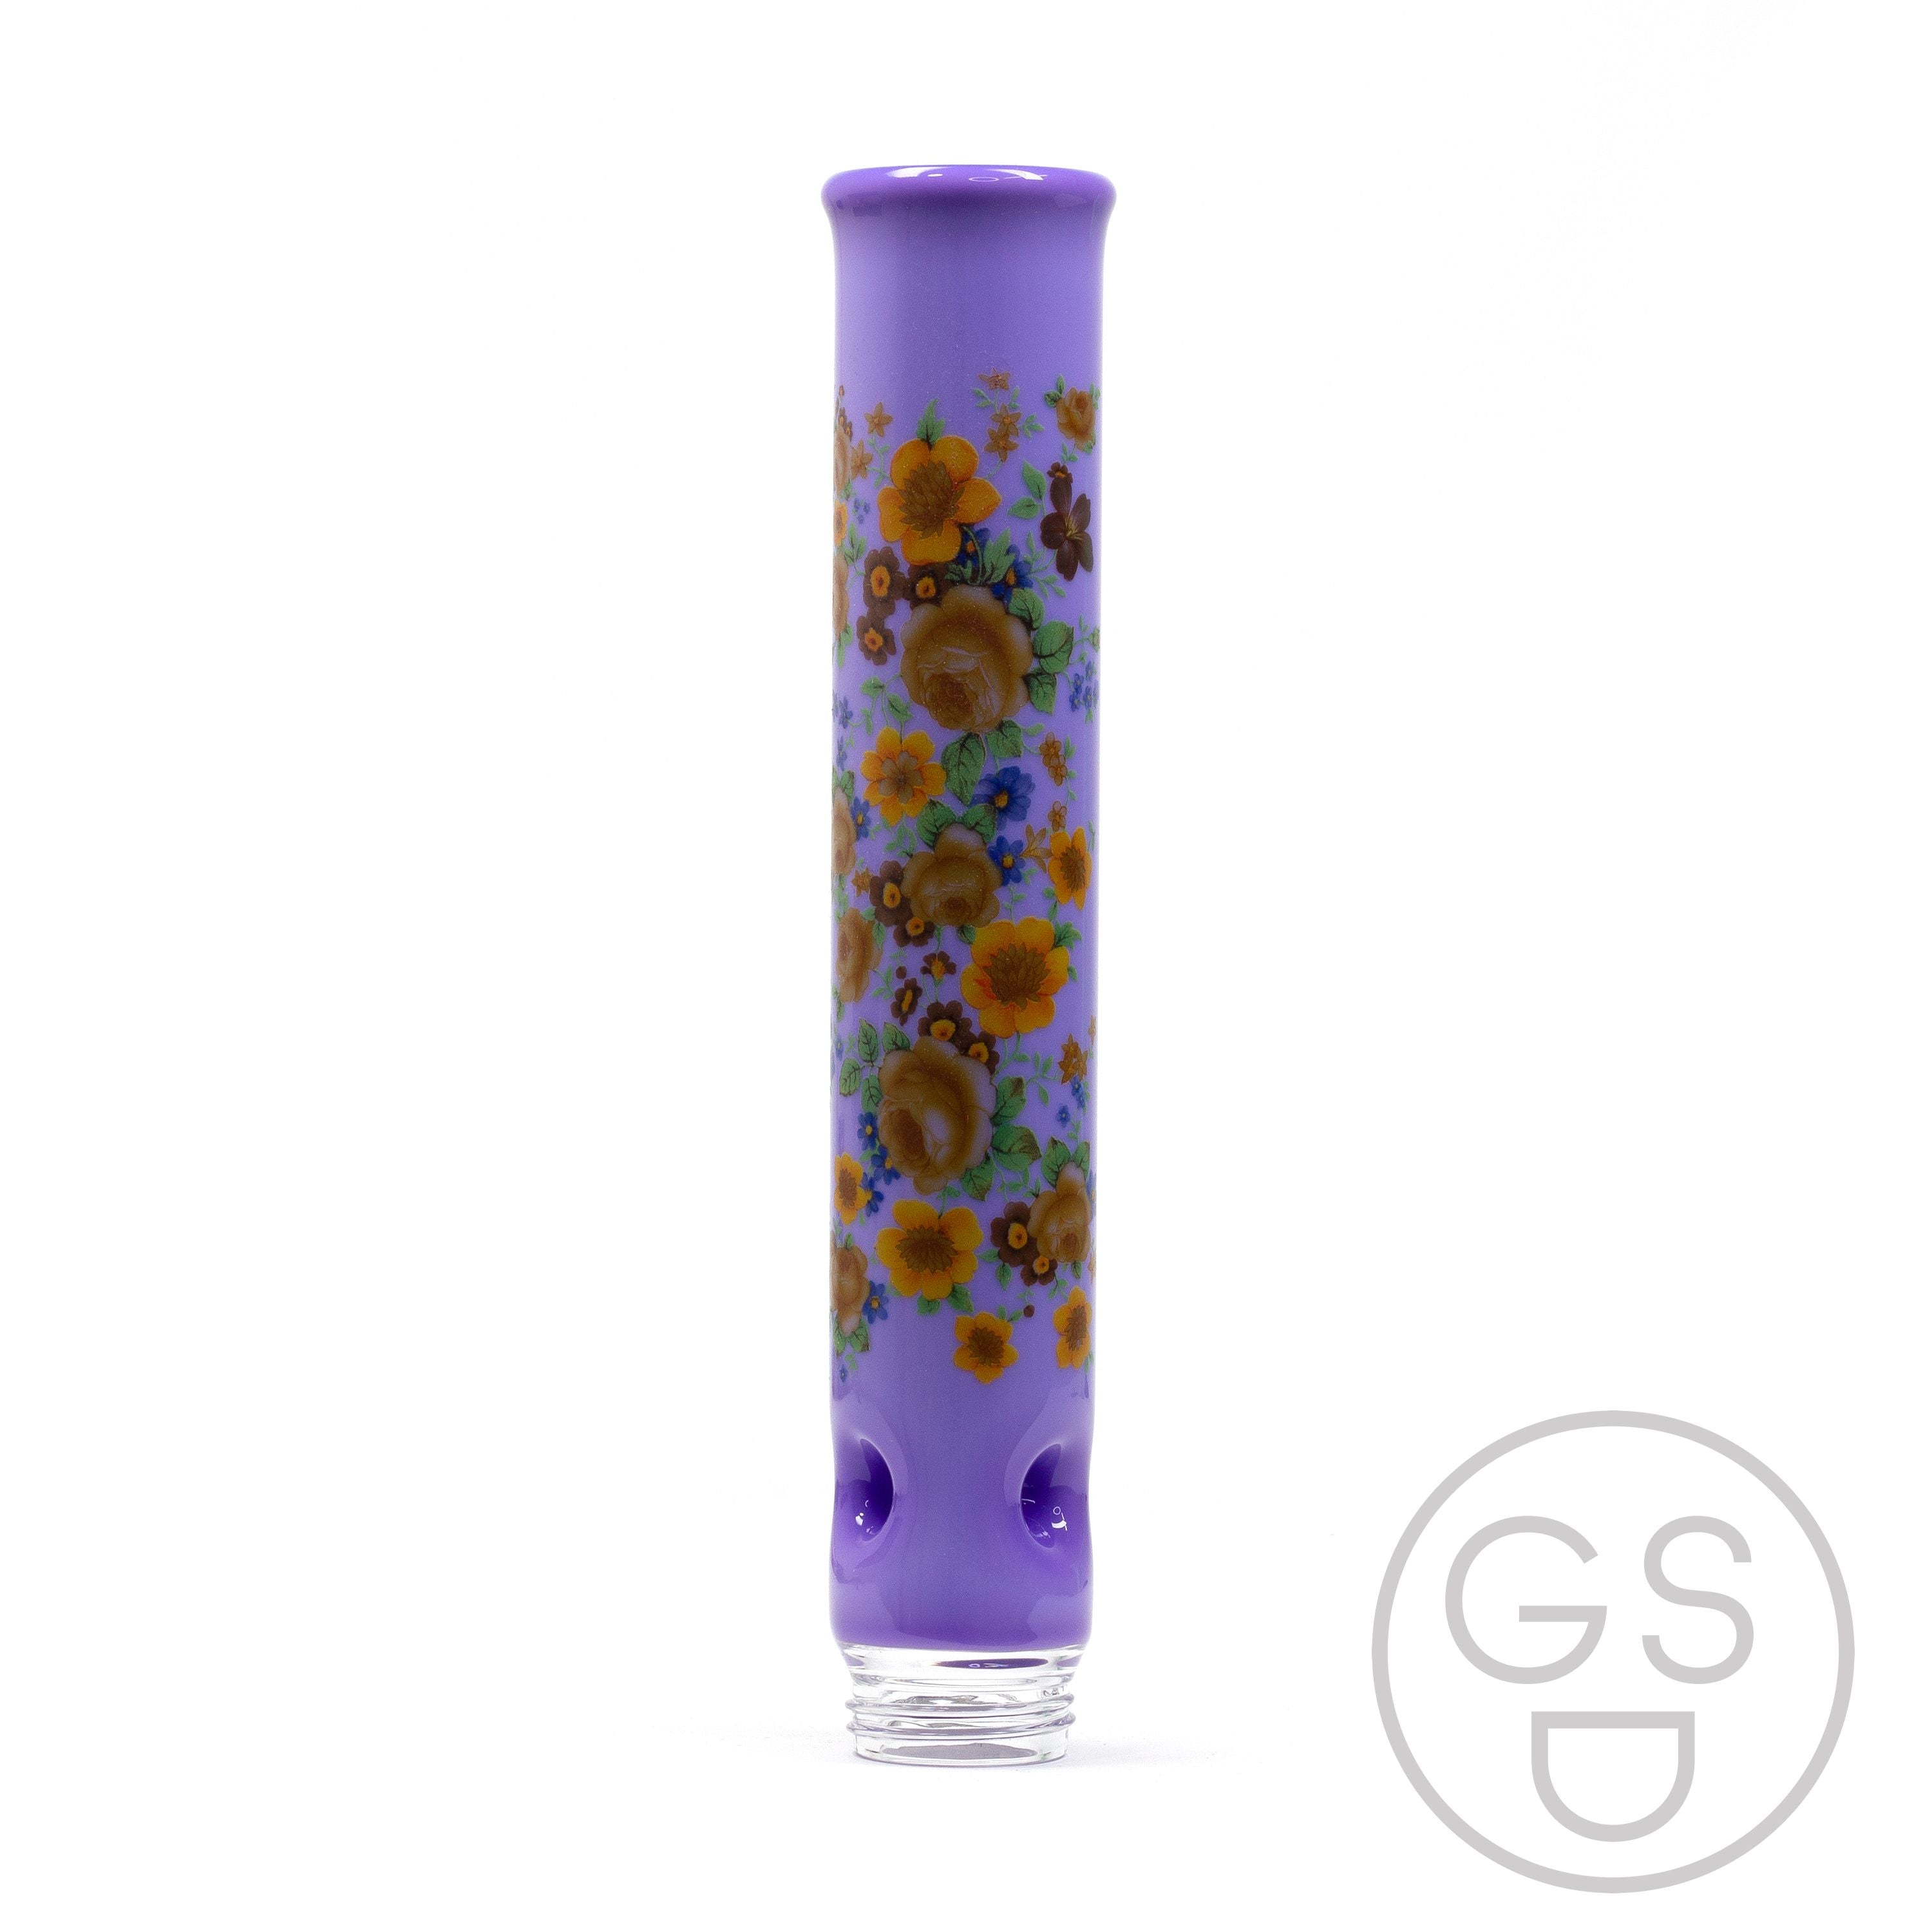 Prism Modular Waterpipe Tall Mouthpiece - Vintage Floral / Grape Taffy